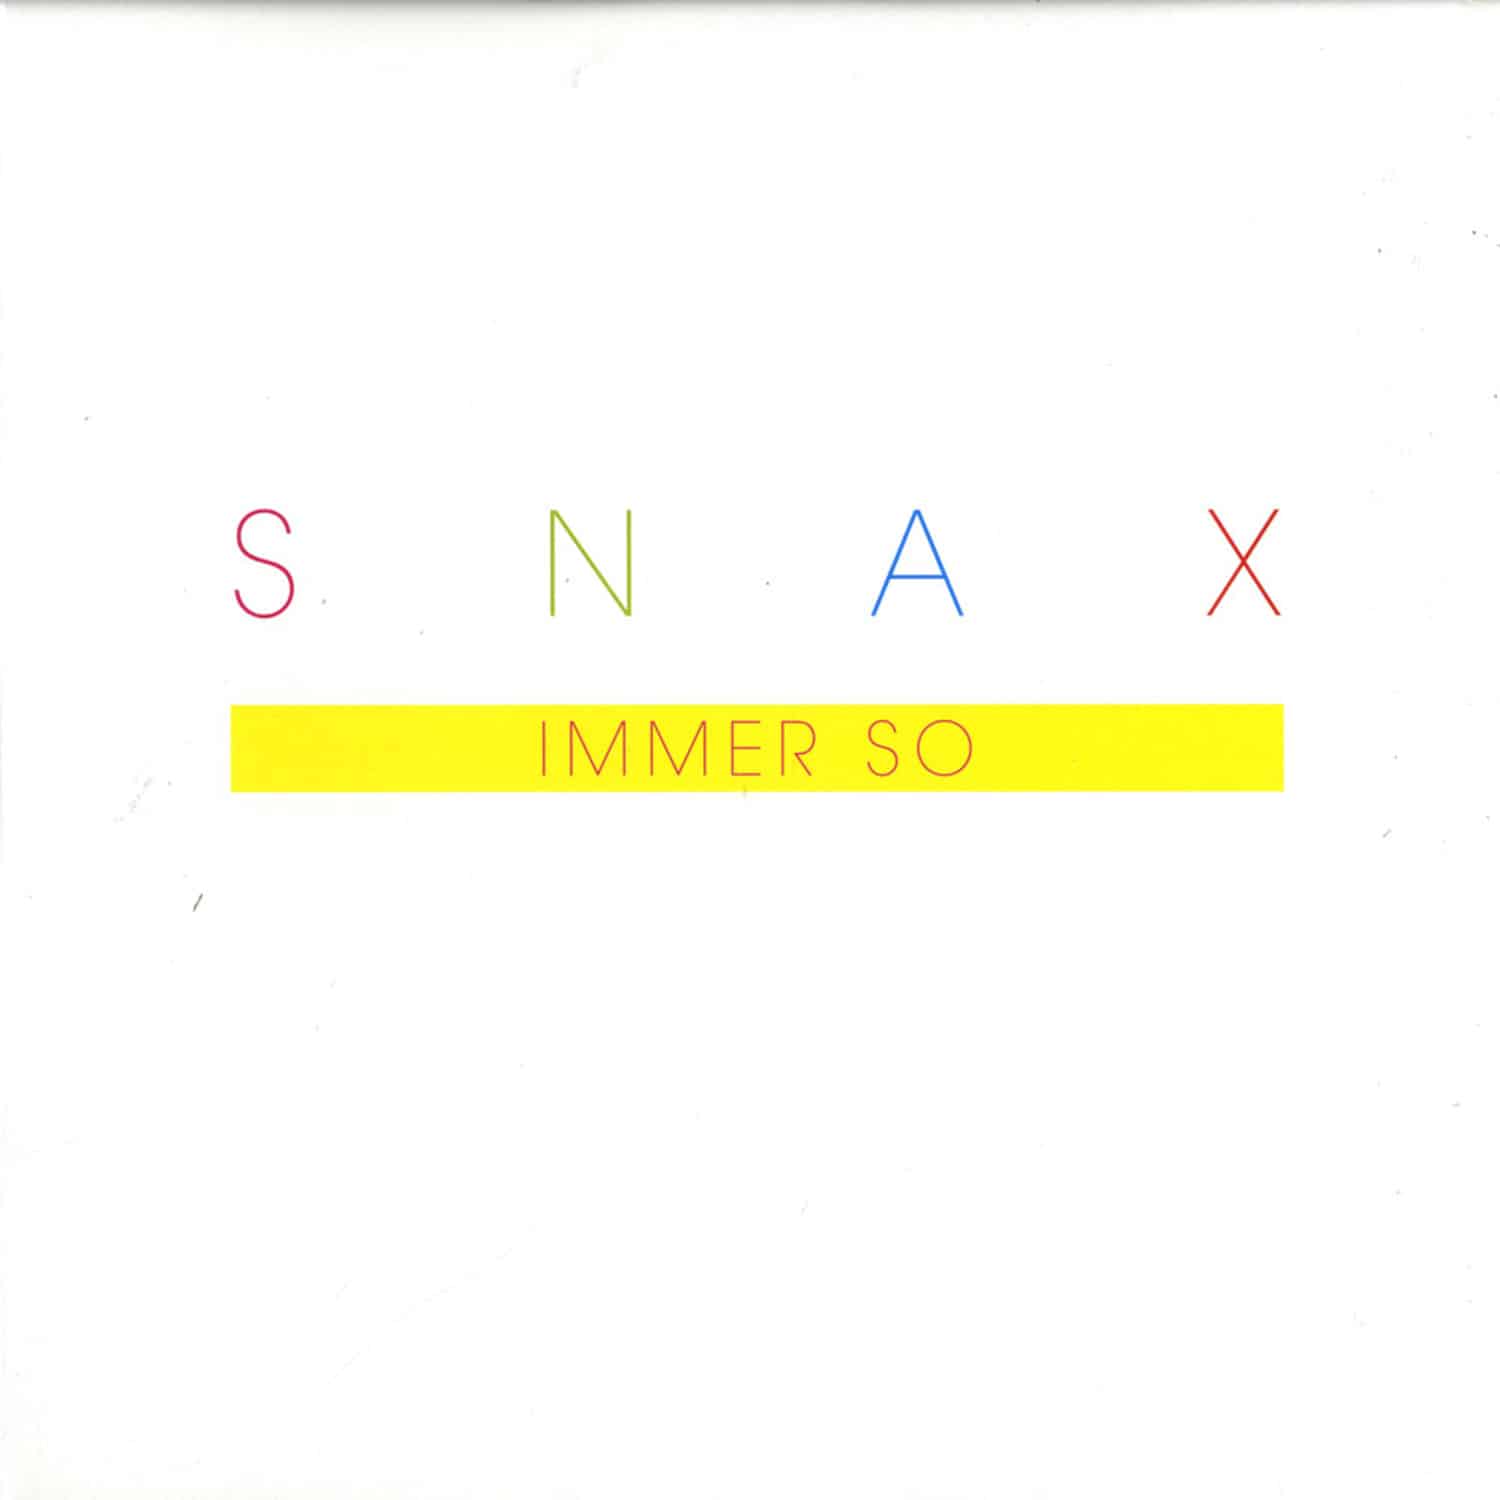 Snax - IMMER SO